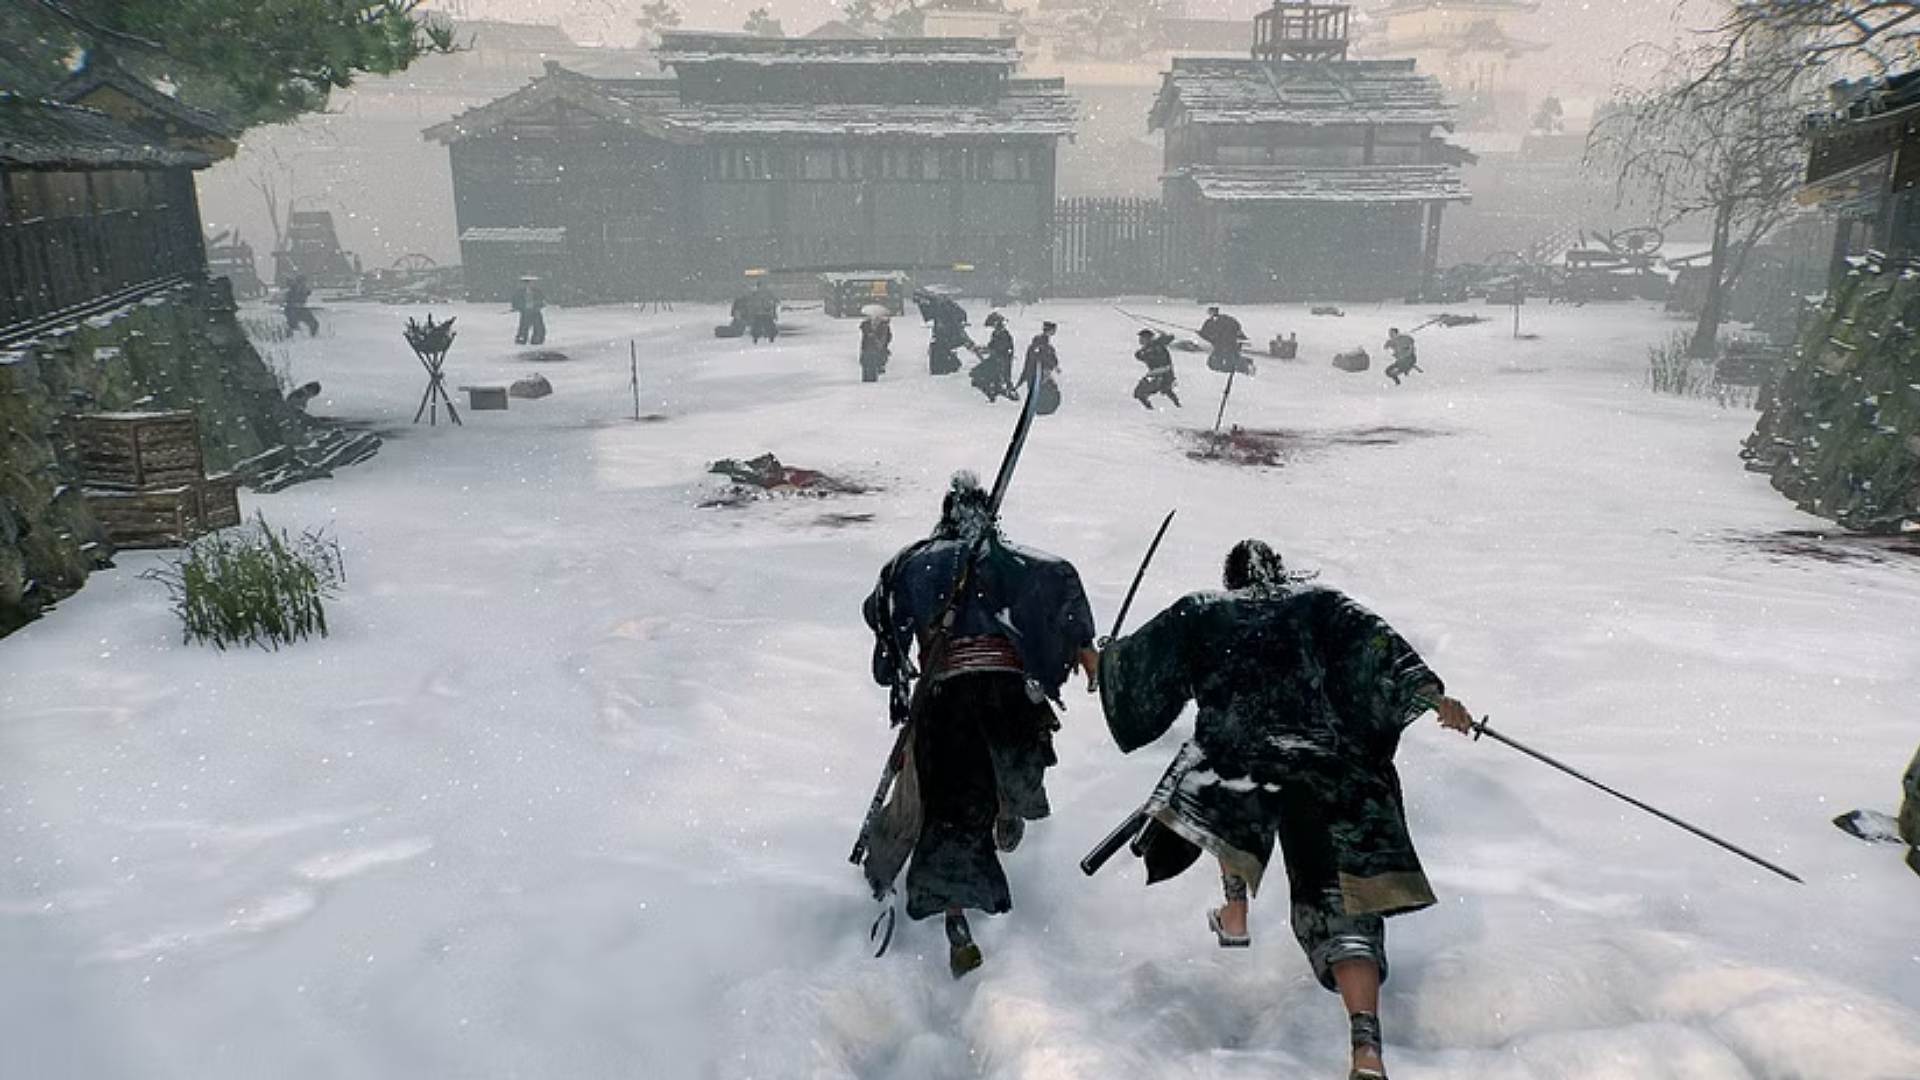 Rise of the Ronin fight in snow area